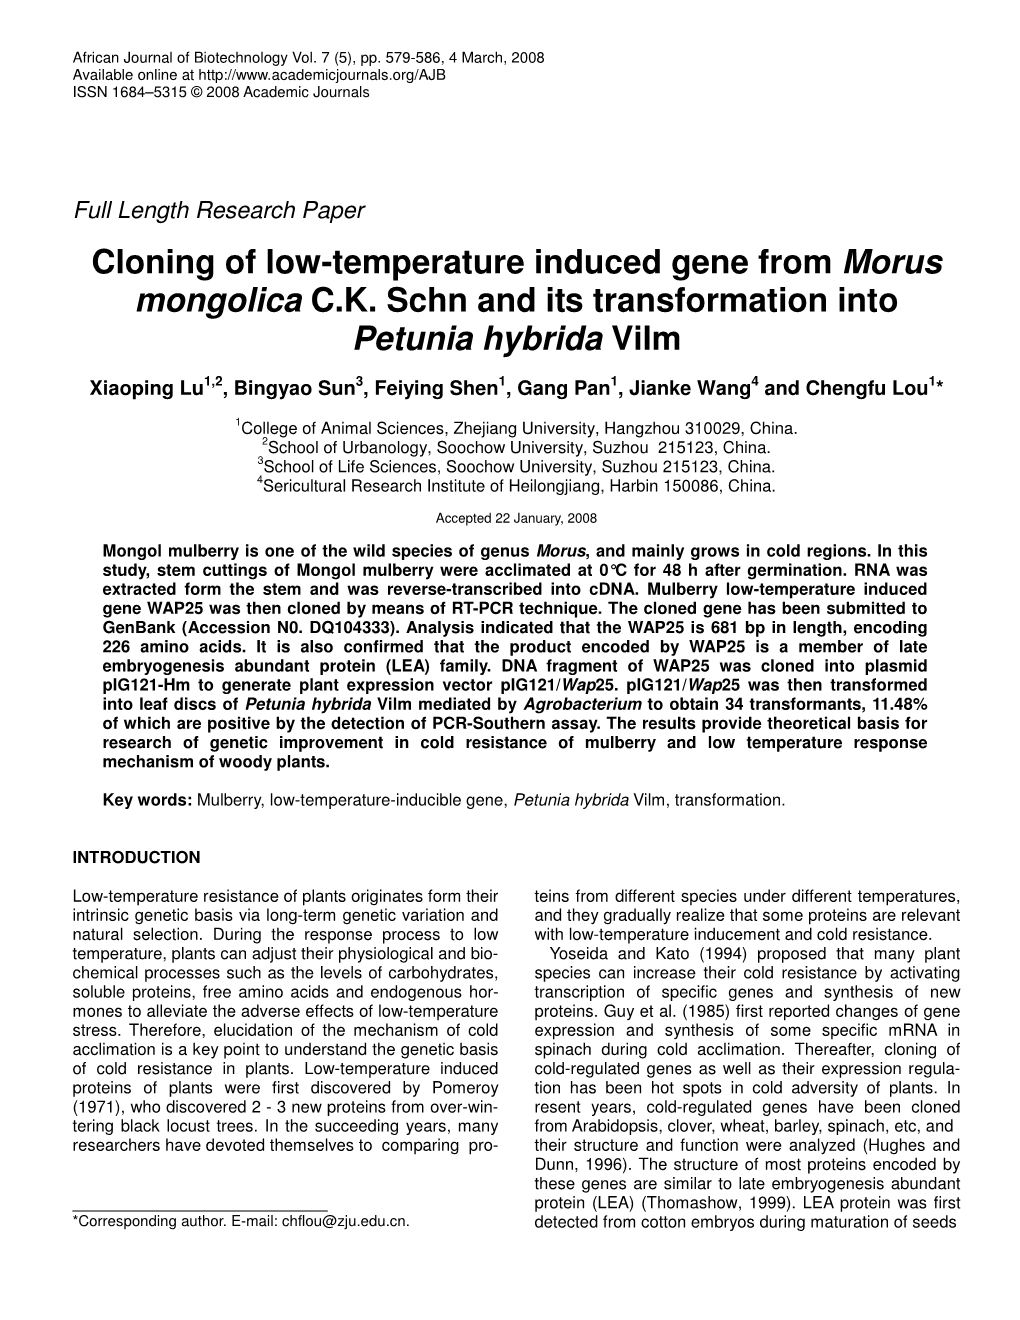 Cloning of Low-Temperature Induced Gene from Morus Mongolica C.K. Schn and Its Transformation Into Petunia Hybrida Vilm